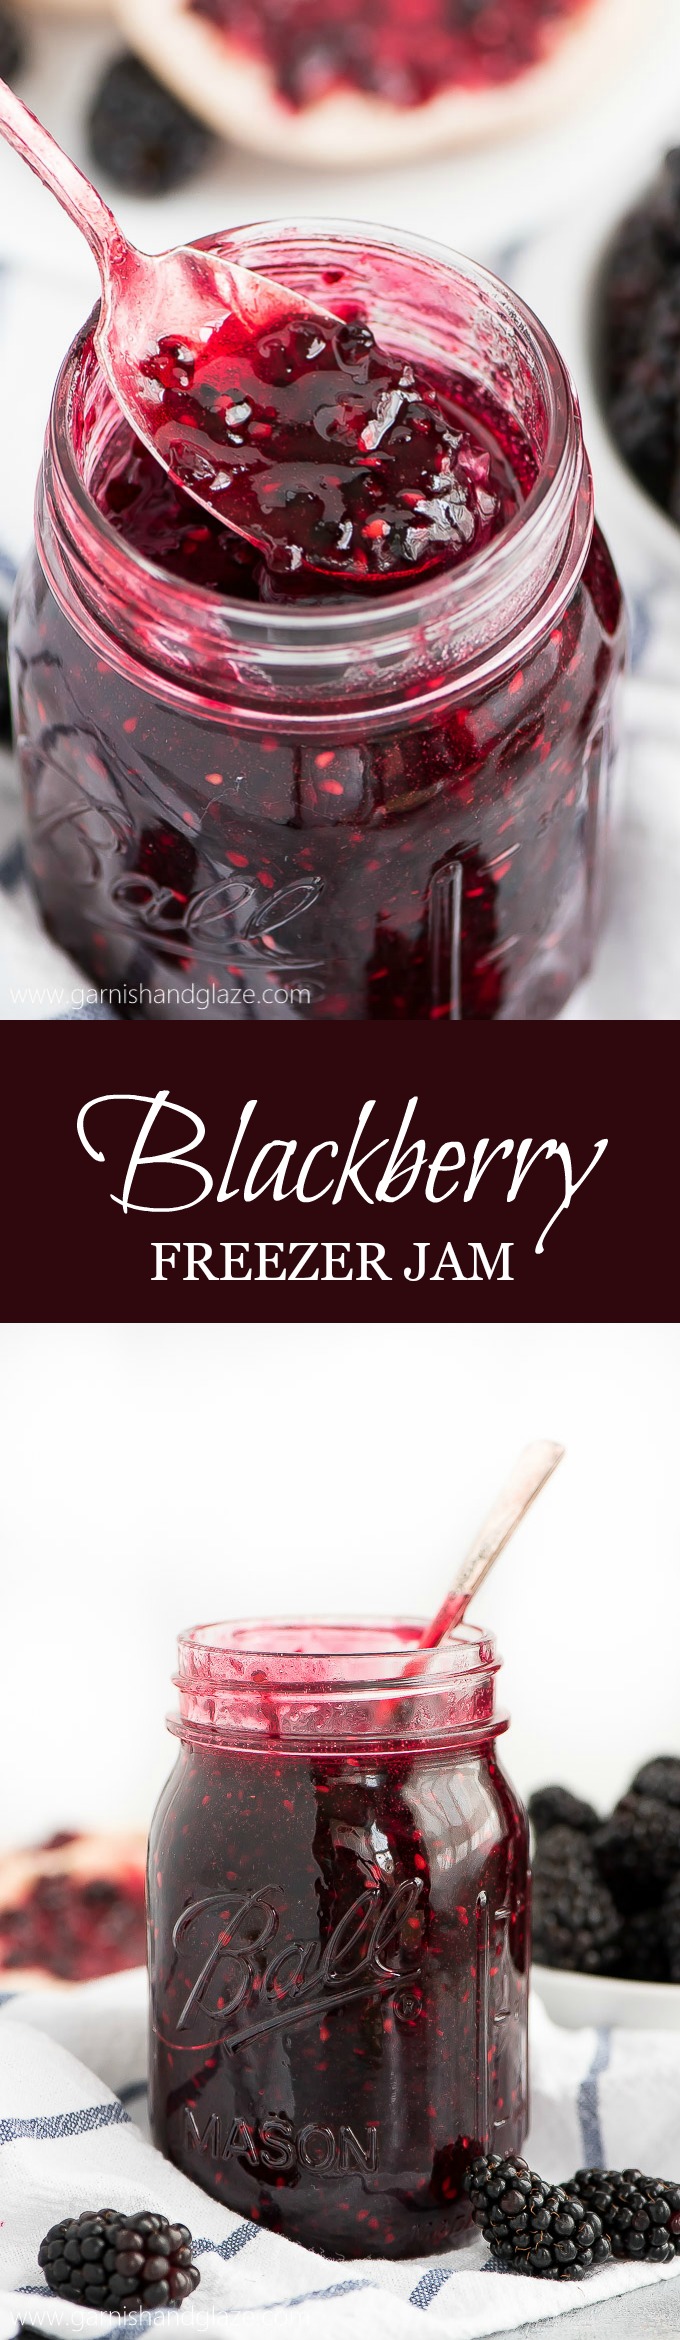 Bottle up those gorgeous dark summer berries in this simple 5-Ingredient Blackberry Freezer Jam. Spread it over everything from toast to cake!